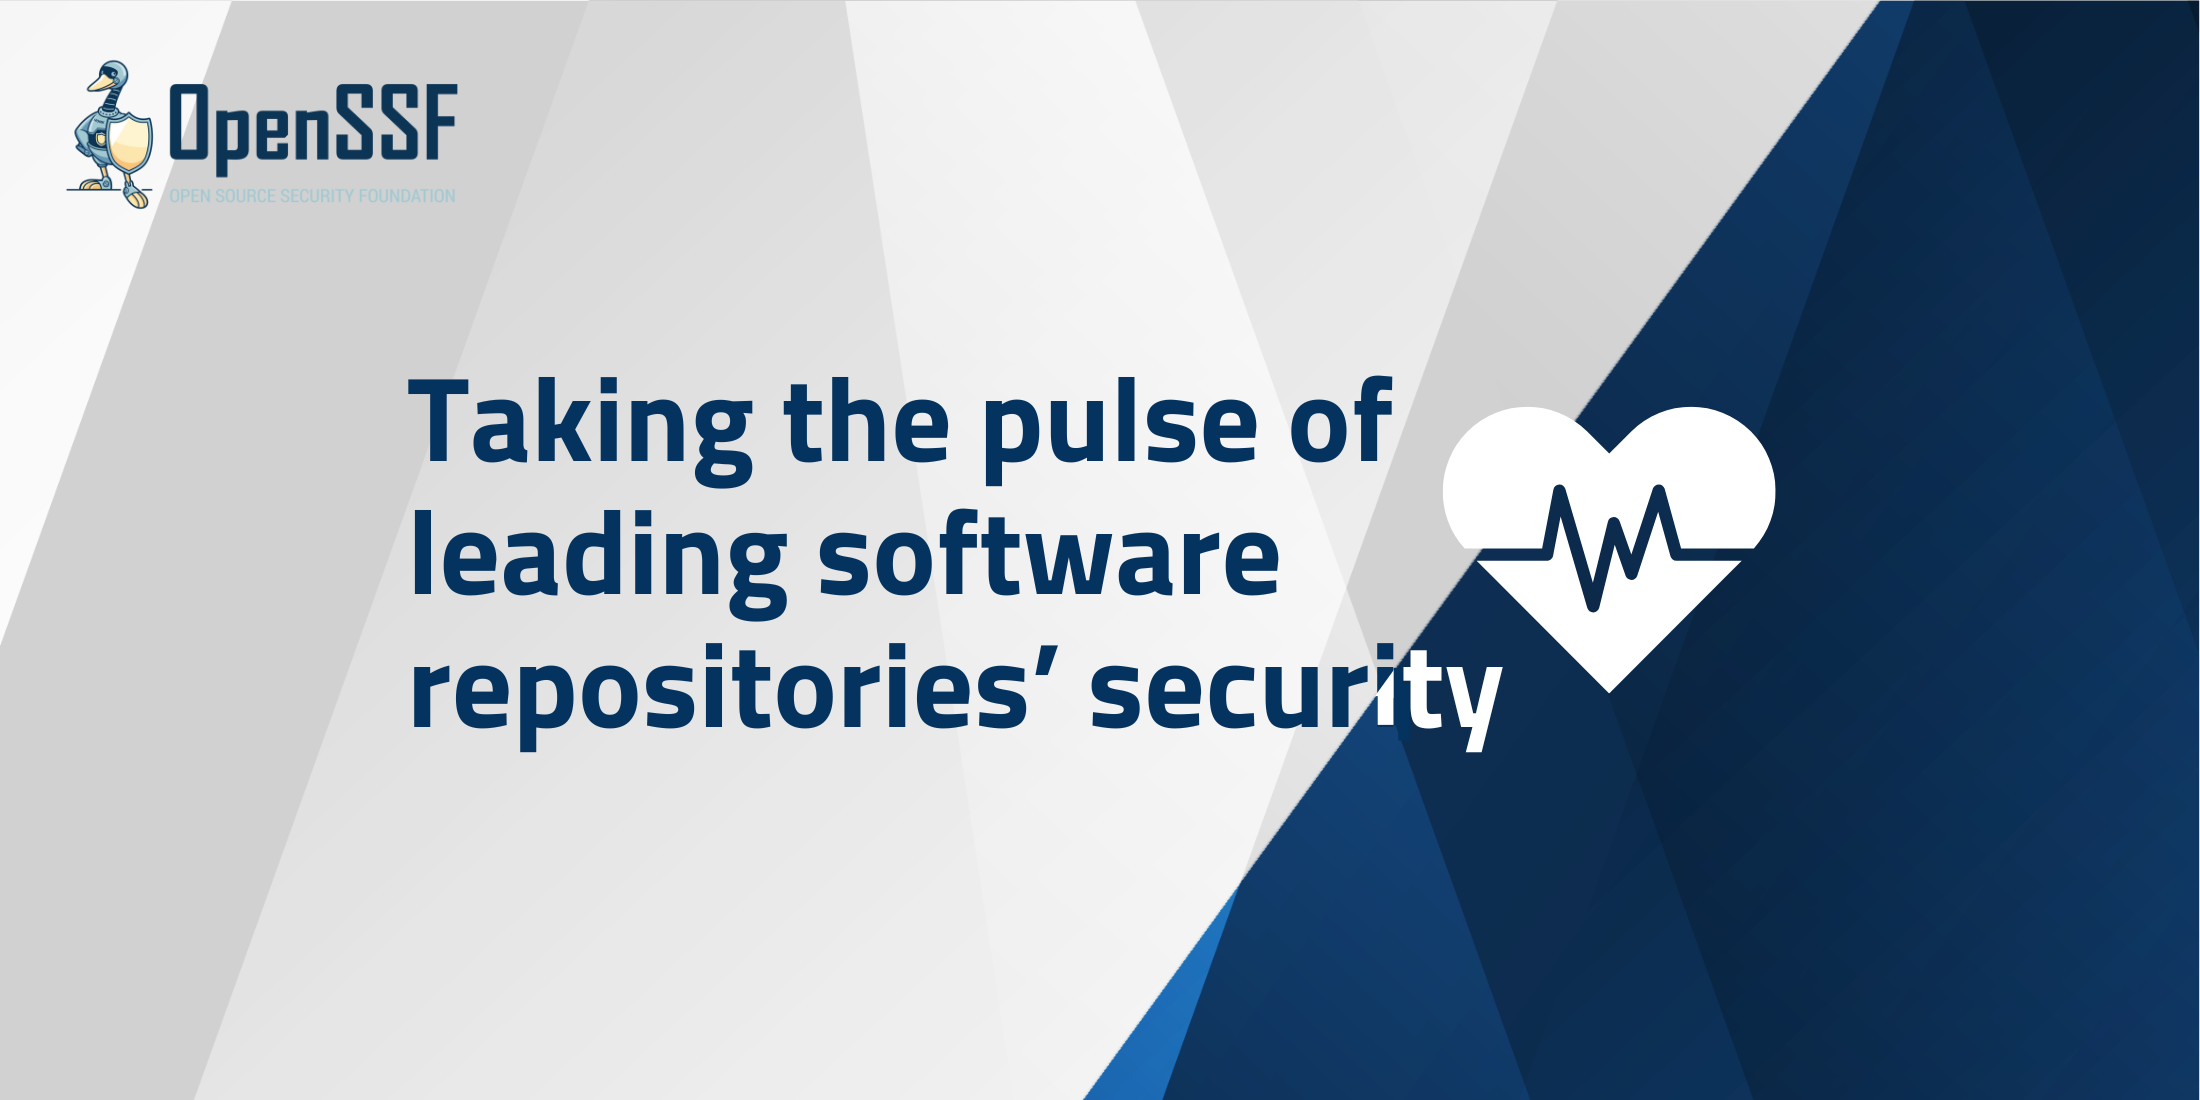 Taking the pulse of leading software repositories’ security